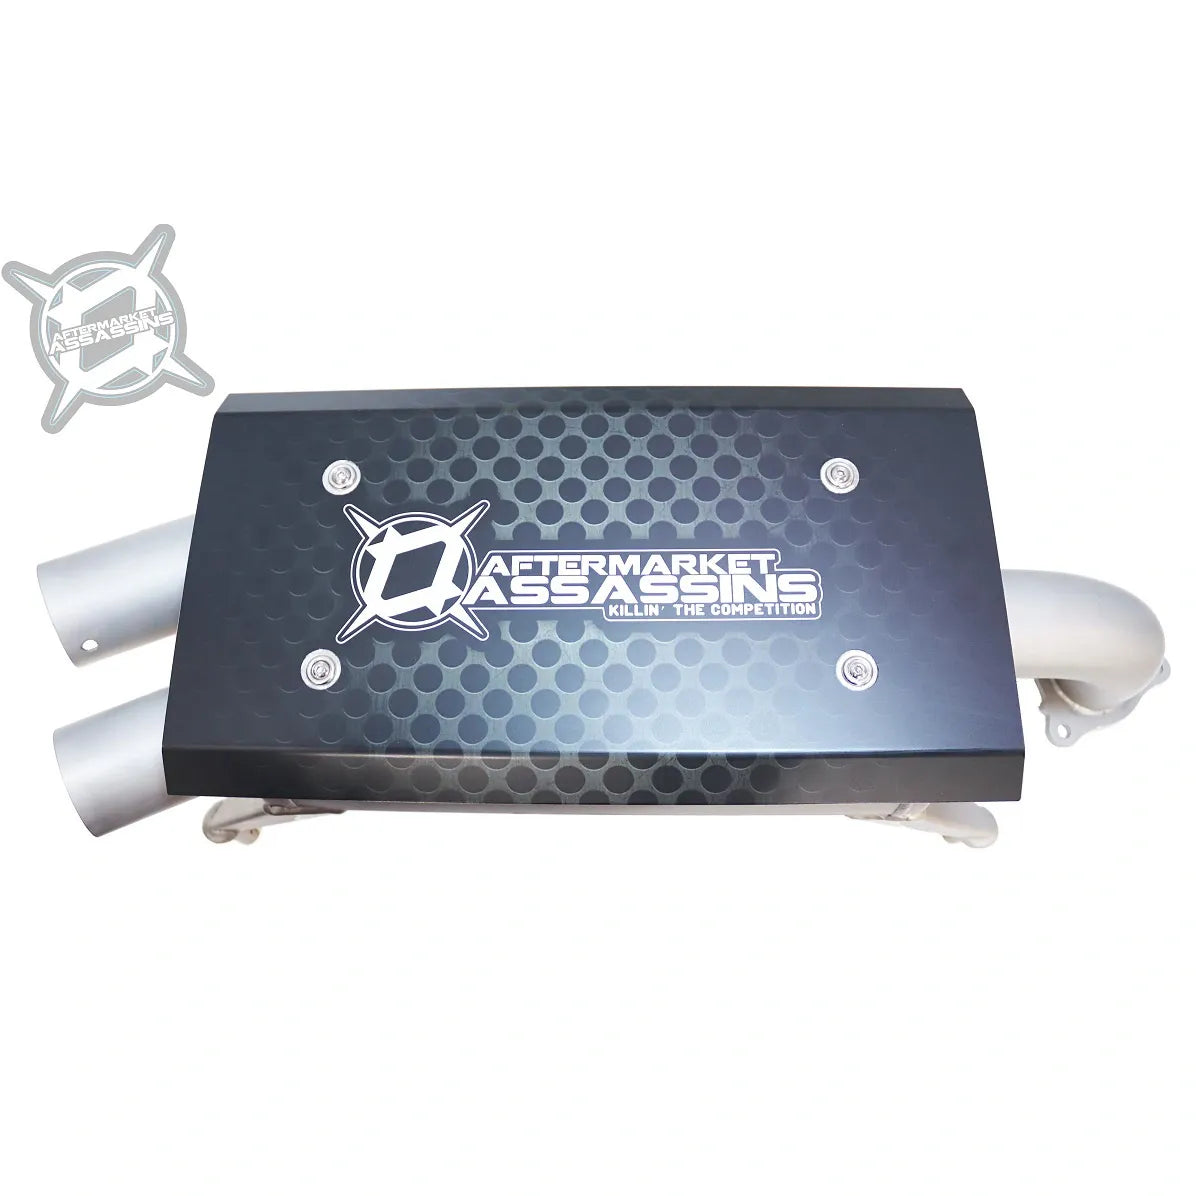 AFTERMARKET ASSASSINS- AA Stainless Slip-On Exhaust for 2020-Up RZR Pro XP/Turbo R